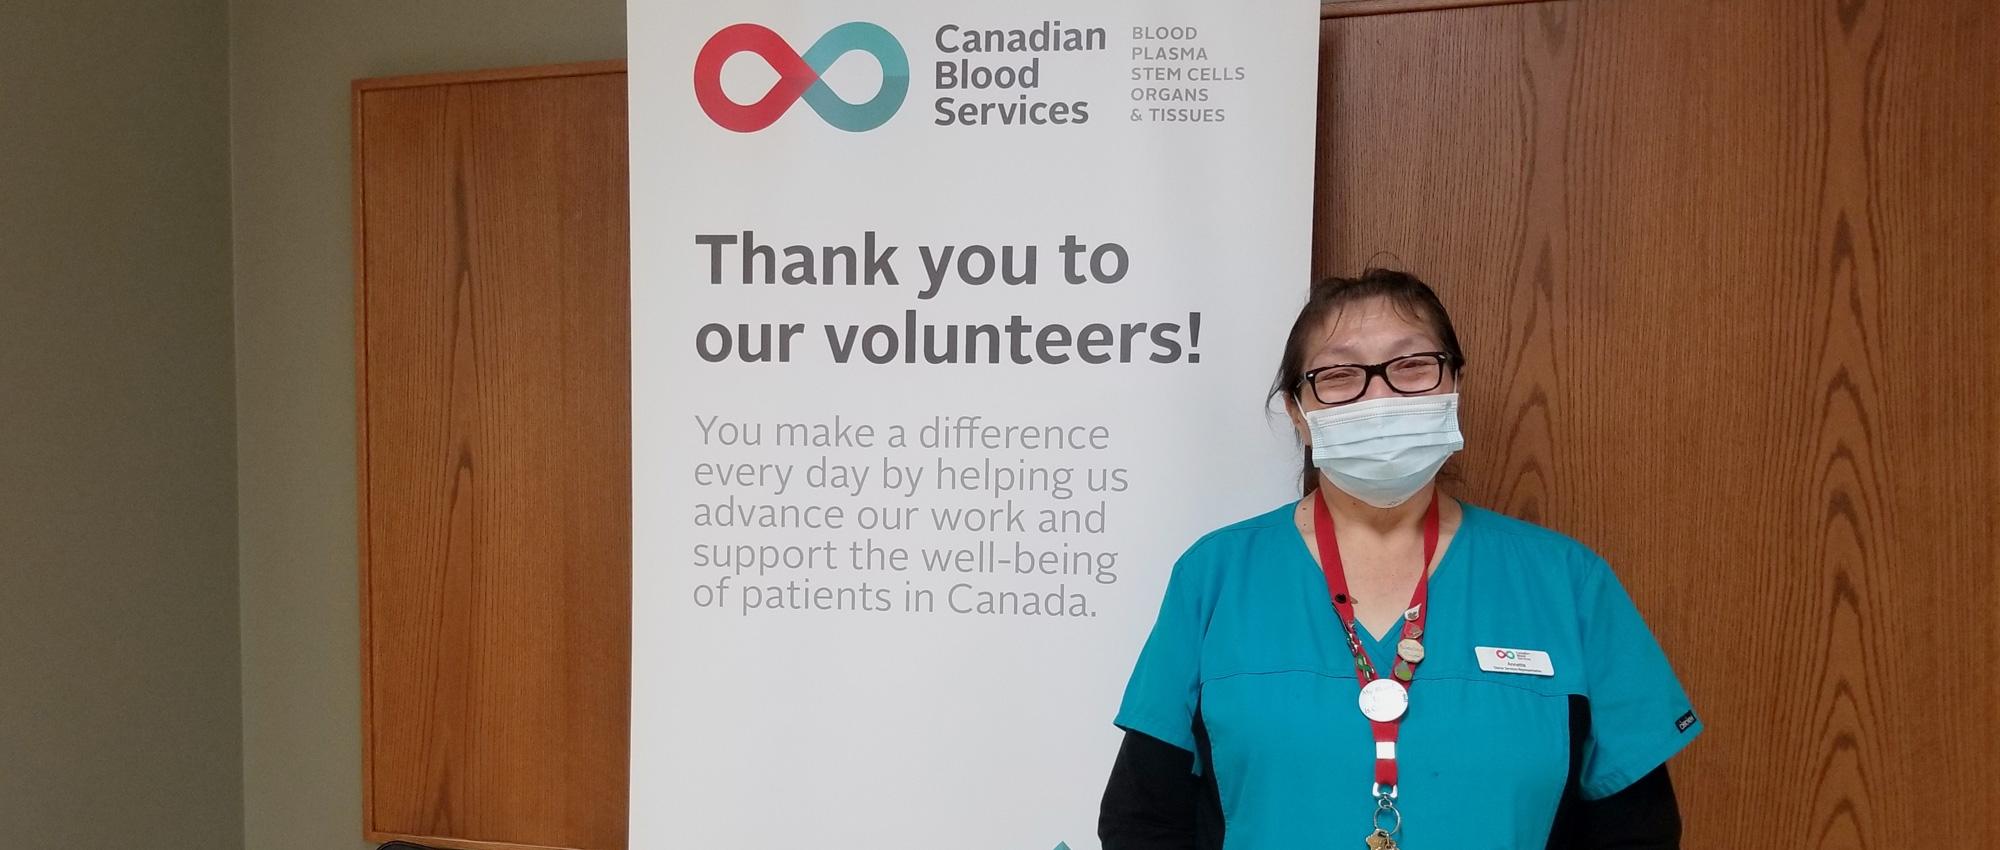 Donor services representative Annette Regalado, dressed in black and blue scrubs, stands in front of a Canadian Blood Services banner which reads: “Thank you to our volunteers.”